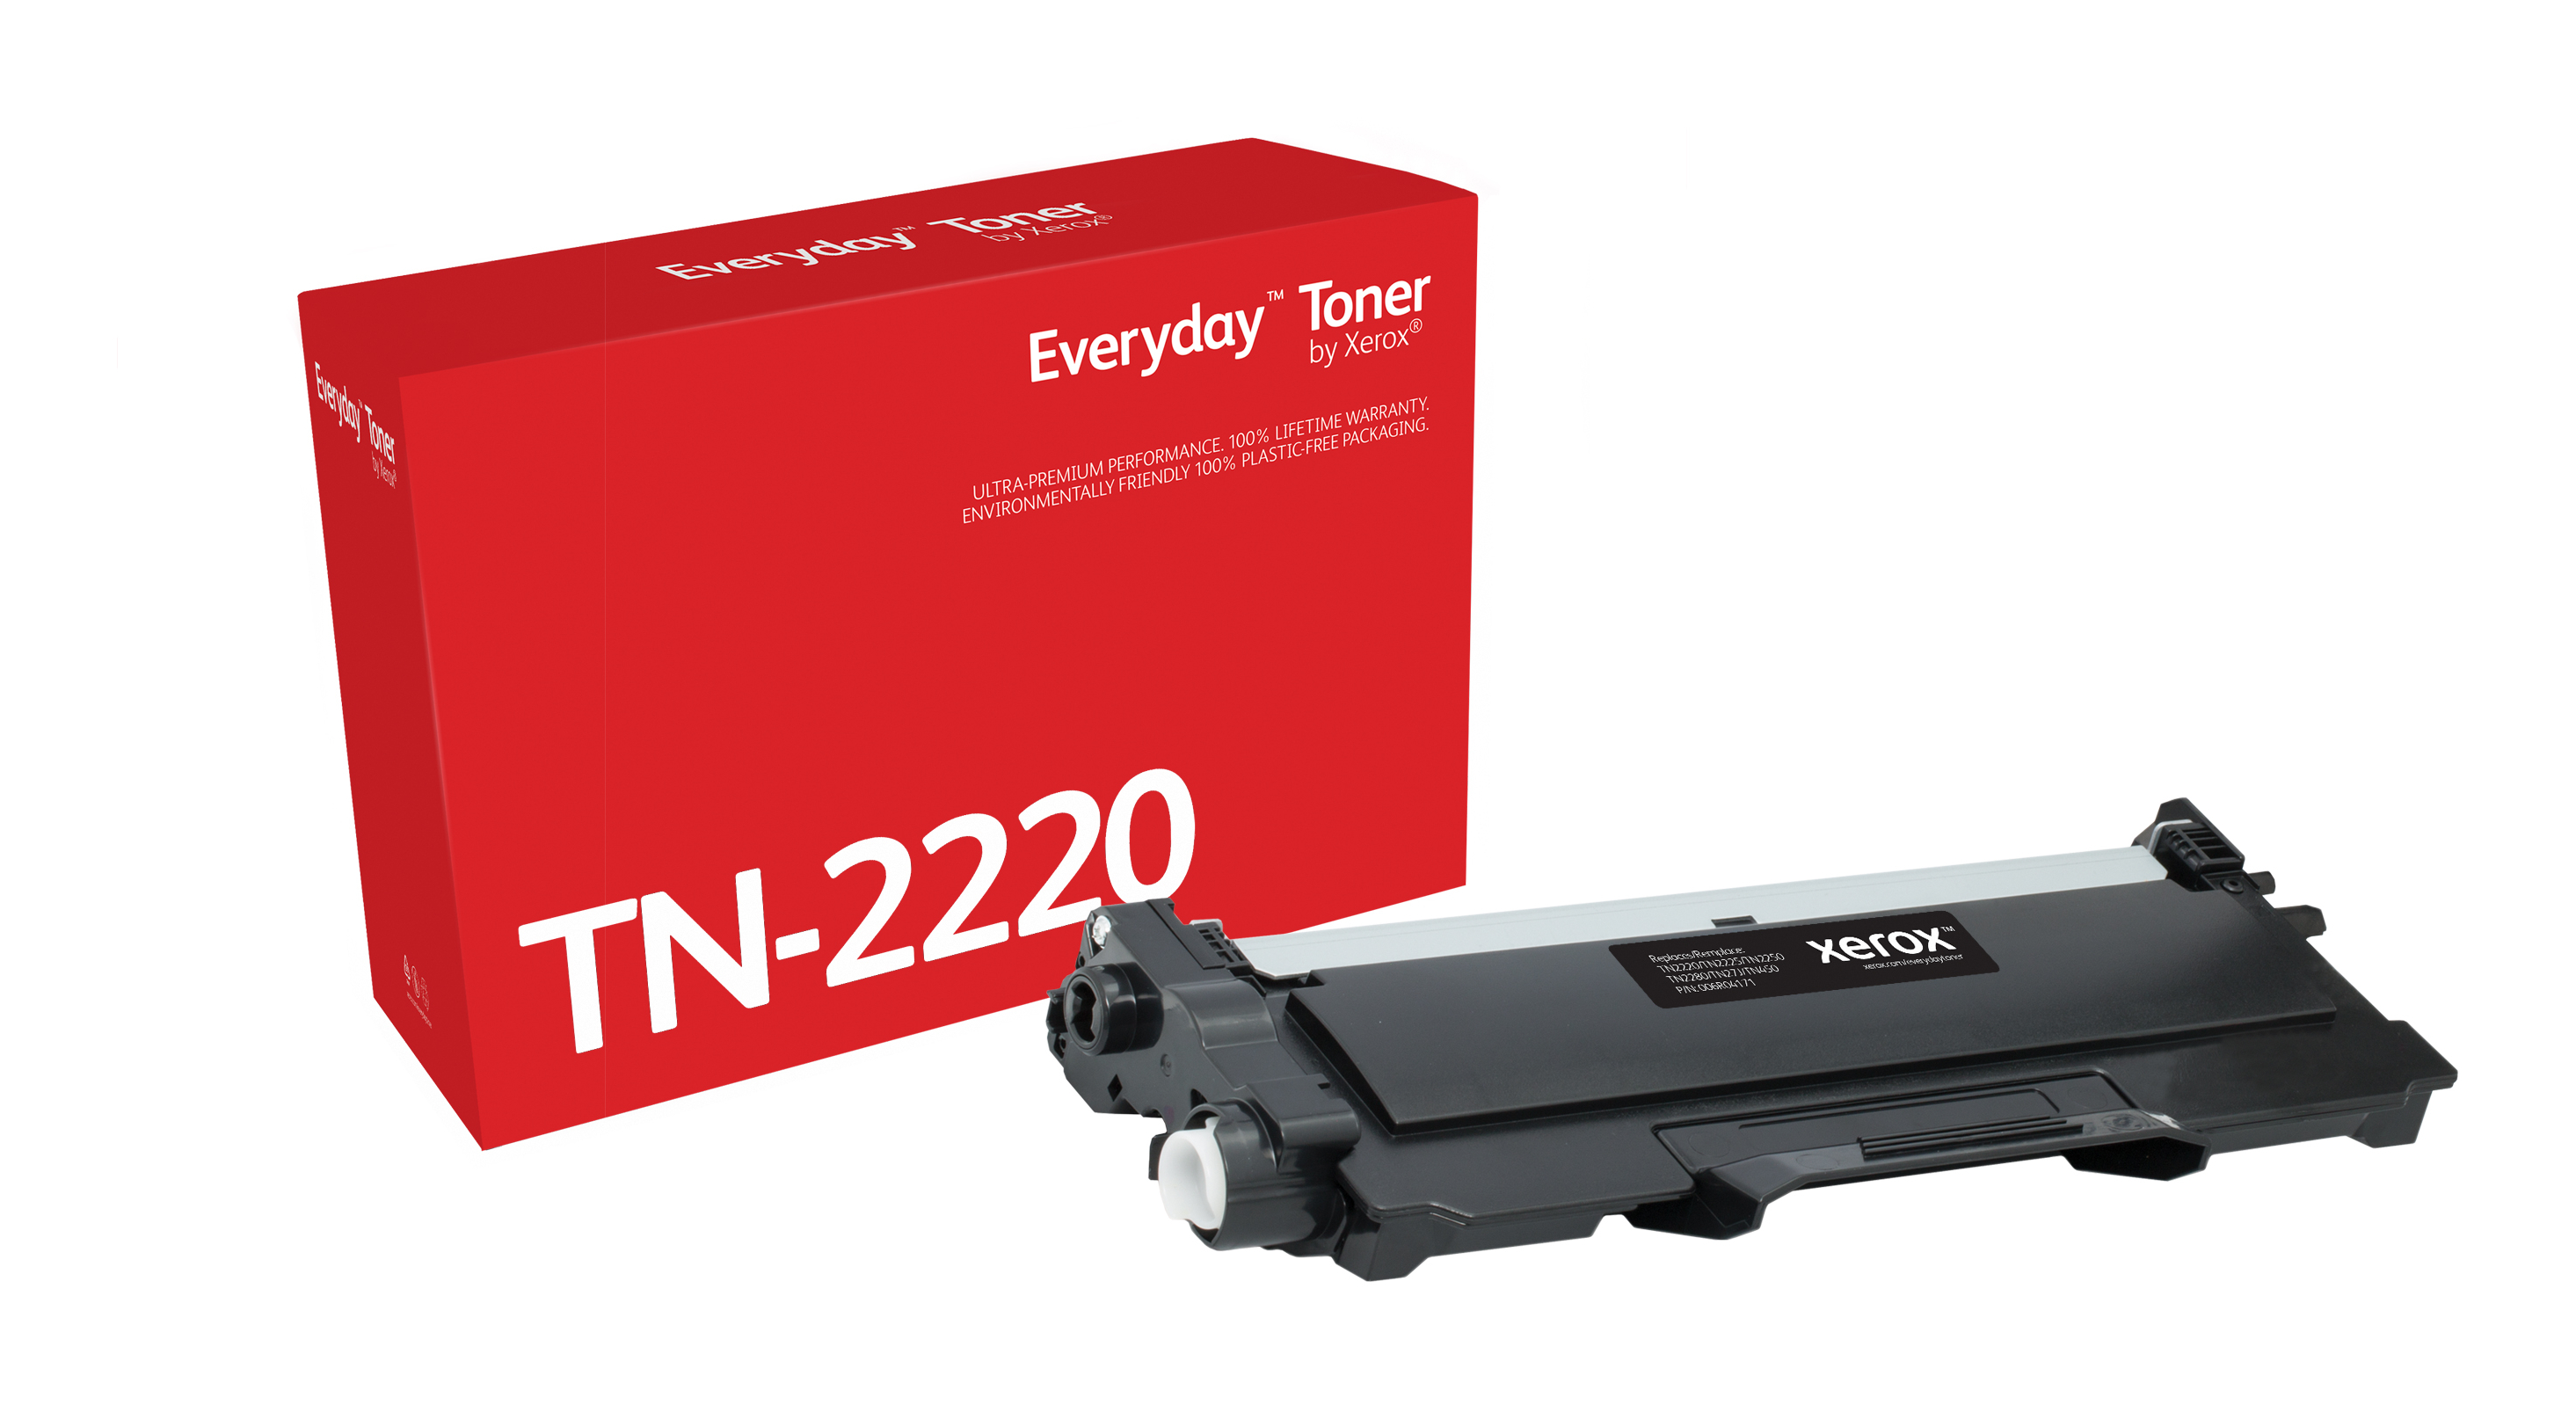 Everyday™ Mono Toner by Xerox compatible with Brother TN-2220, High Yield  006R04171 Genuine Xerox Supplies